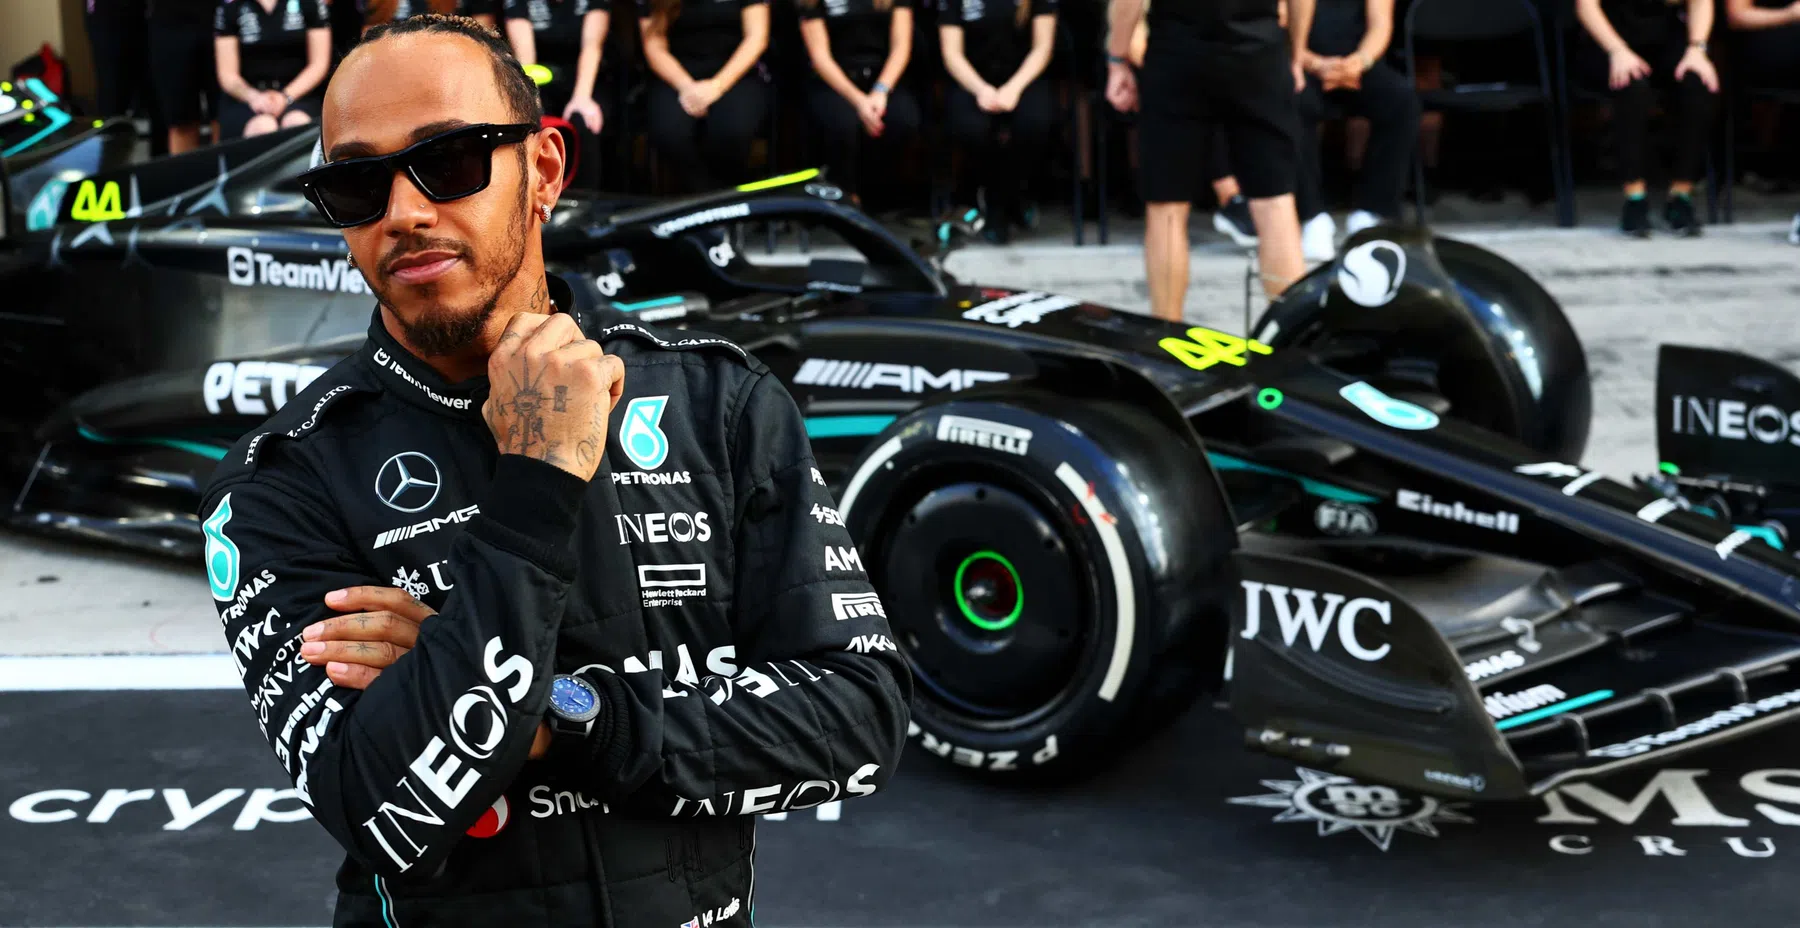 Hamilton doubted himself: Is it me or the car?